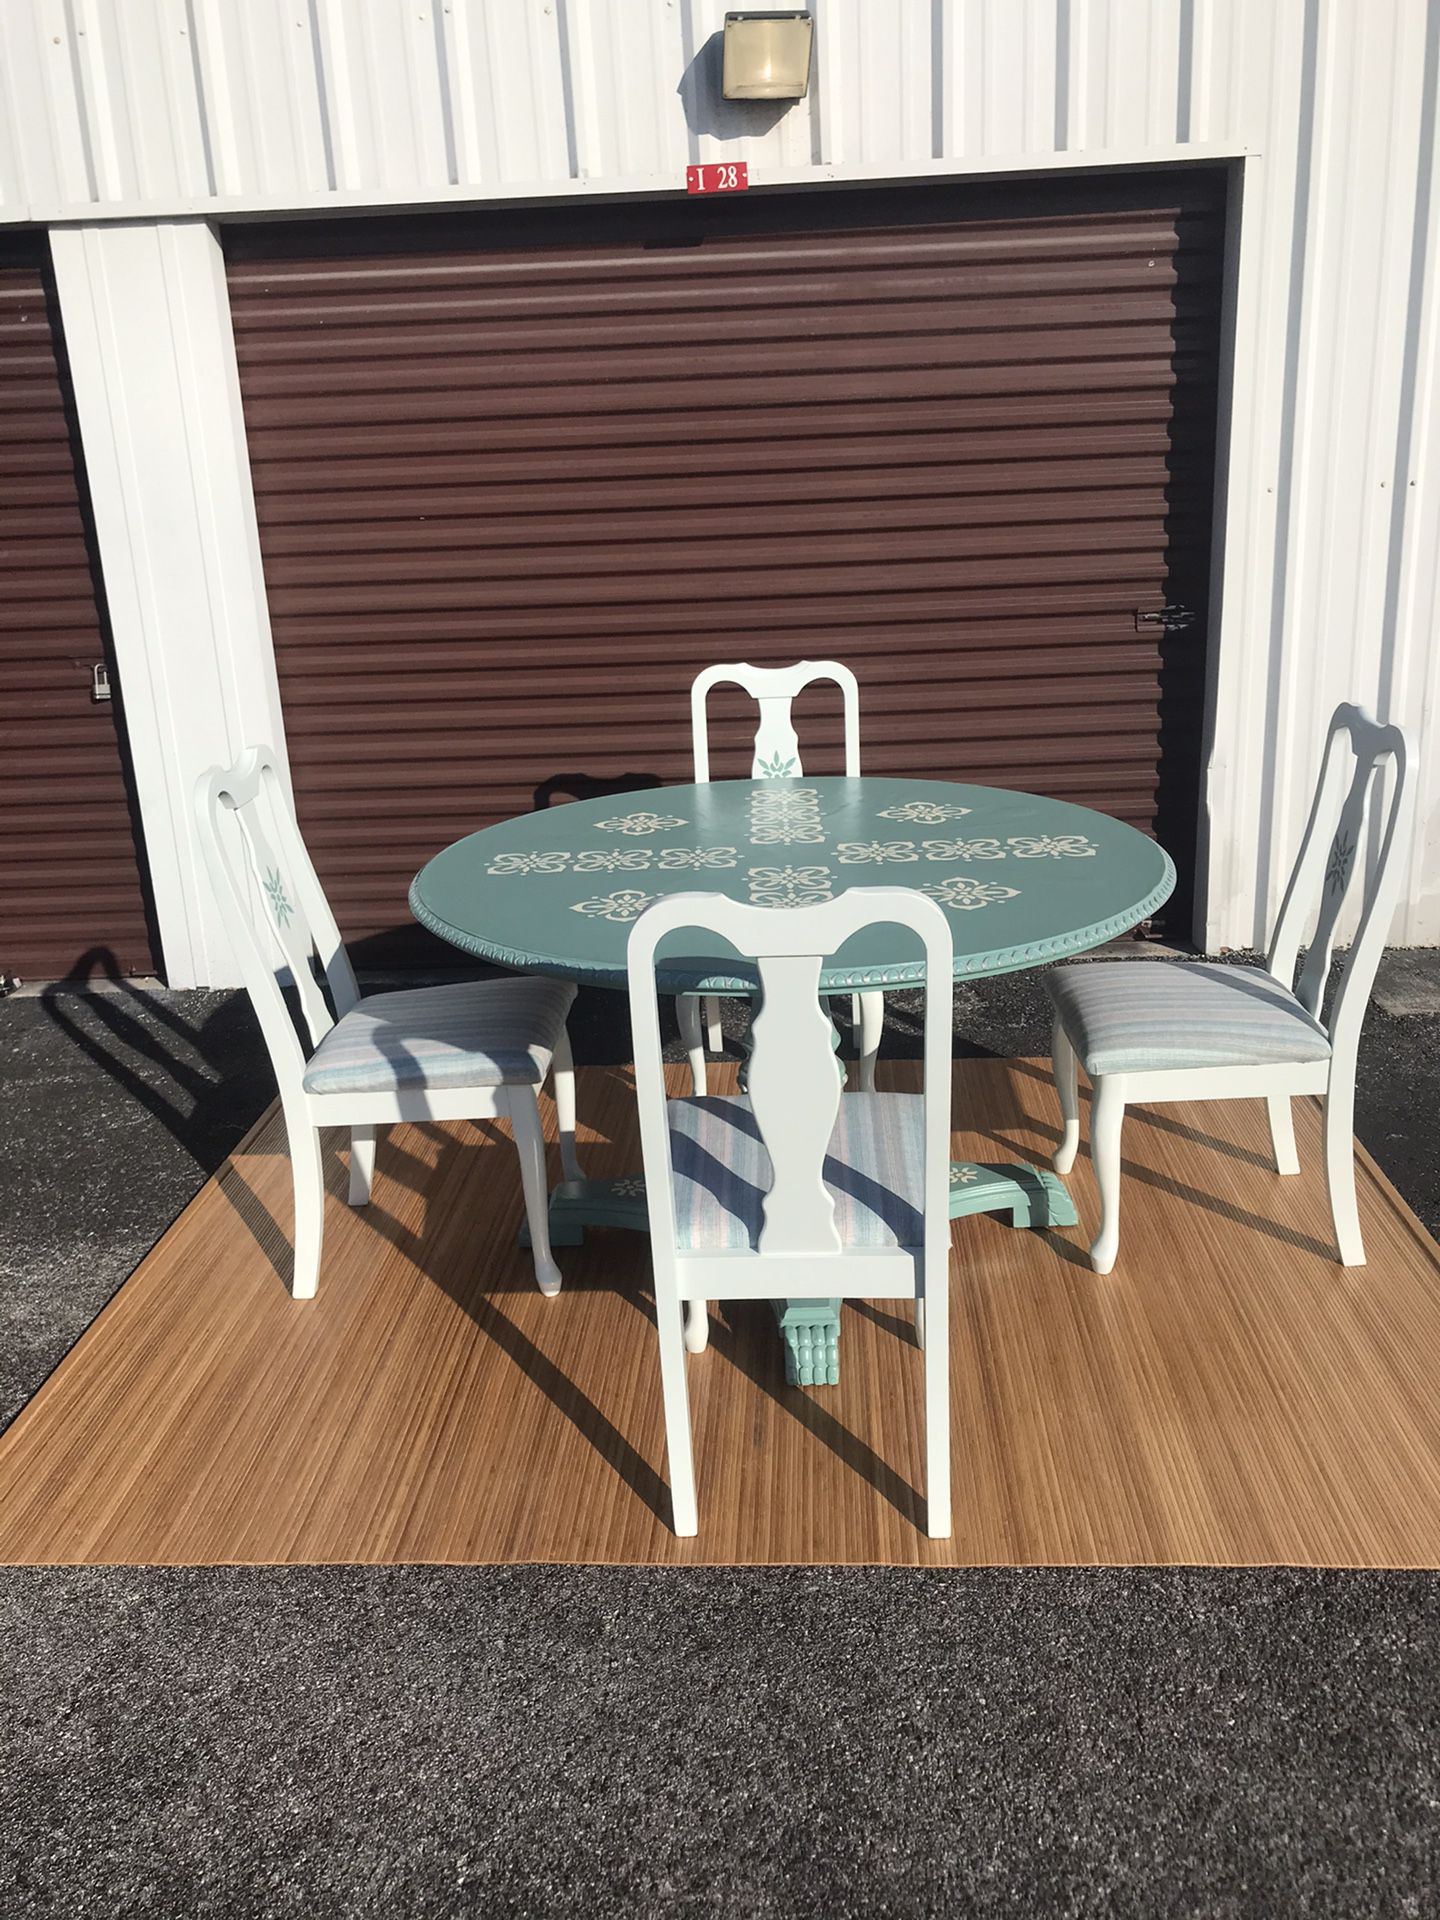 Unique Refinished Round Coastal Clawfoot Dining Room Table W 4 Matching chairs $325 OBO